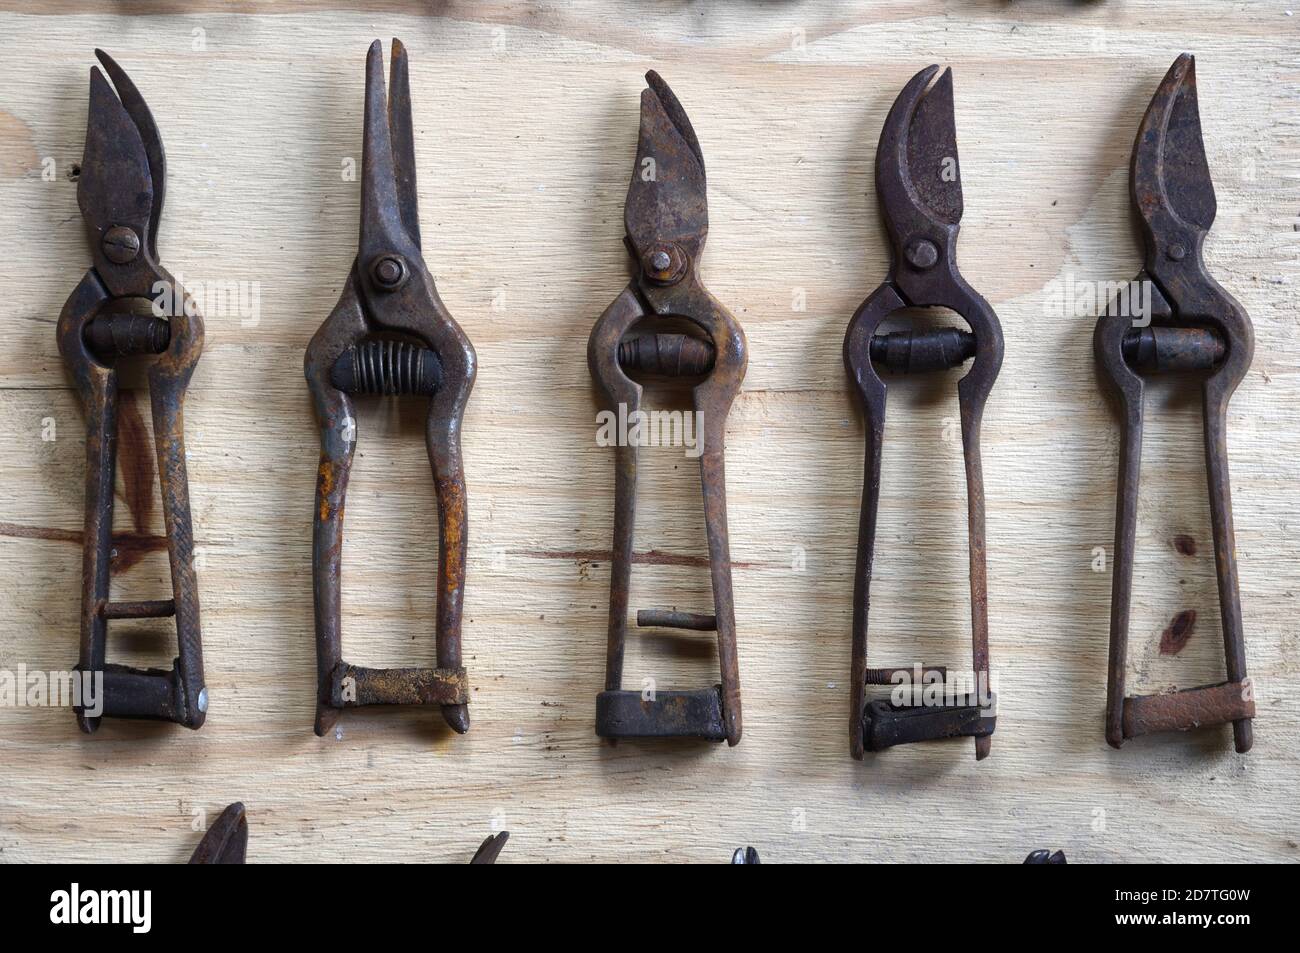 Display, Collection or Arrangement of Vintage, Old or Rusty Secateurs, Pruning Shears or Hand Pruners Stock Photo